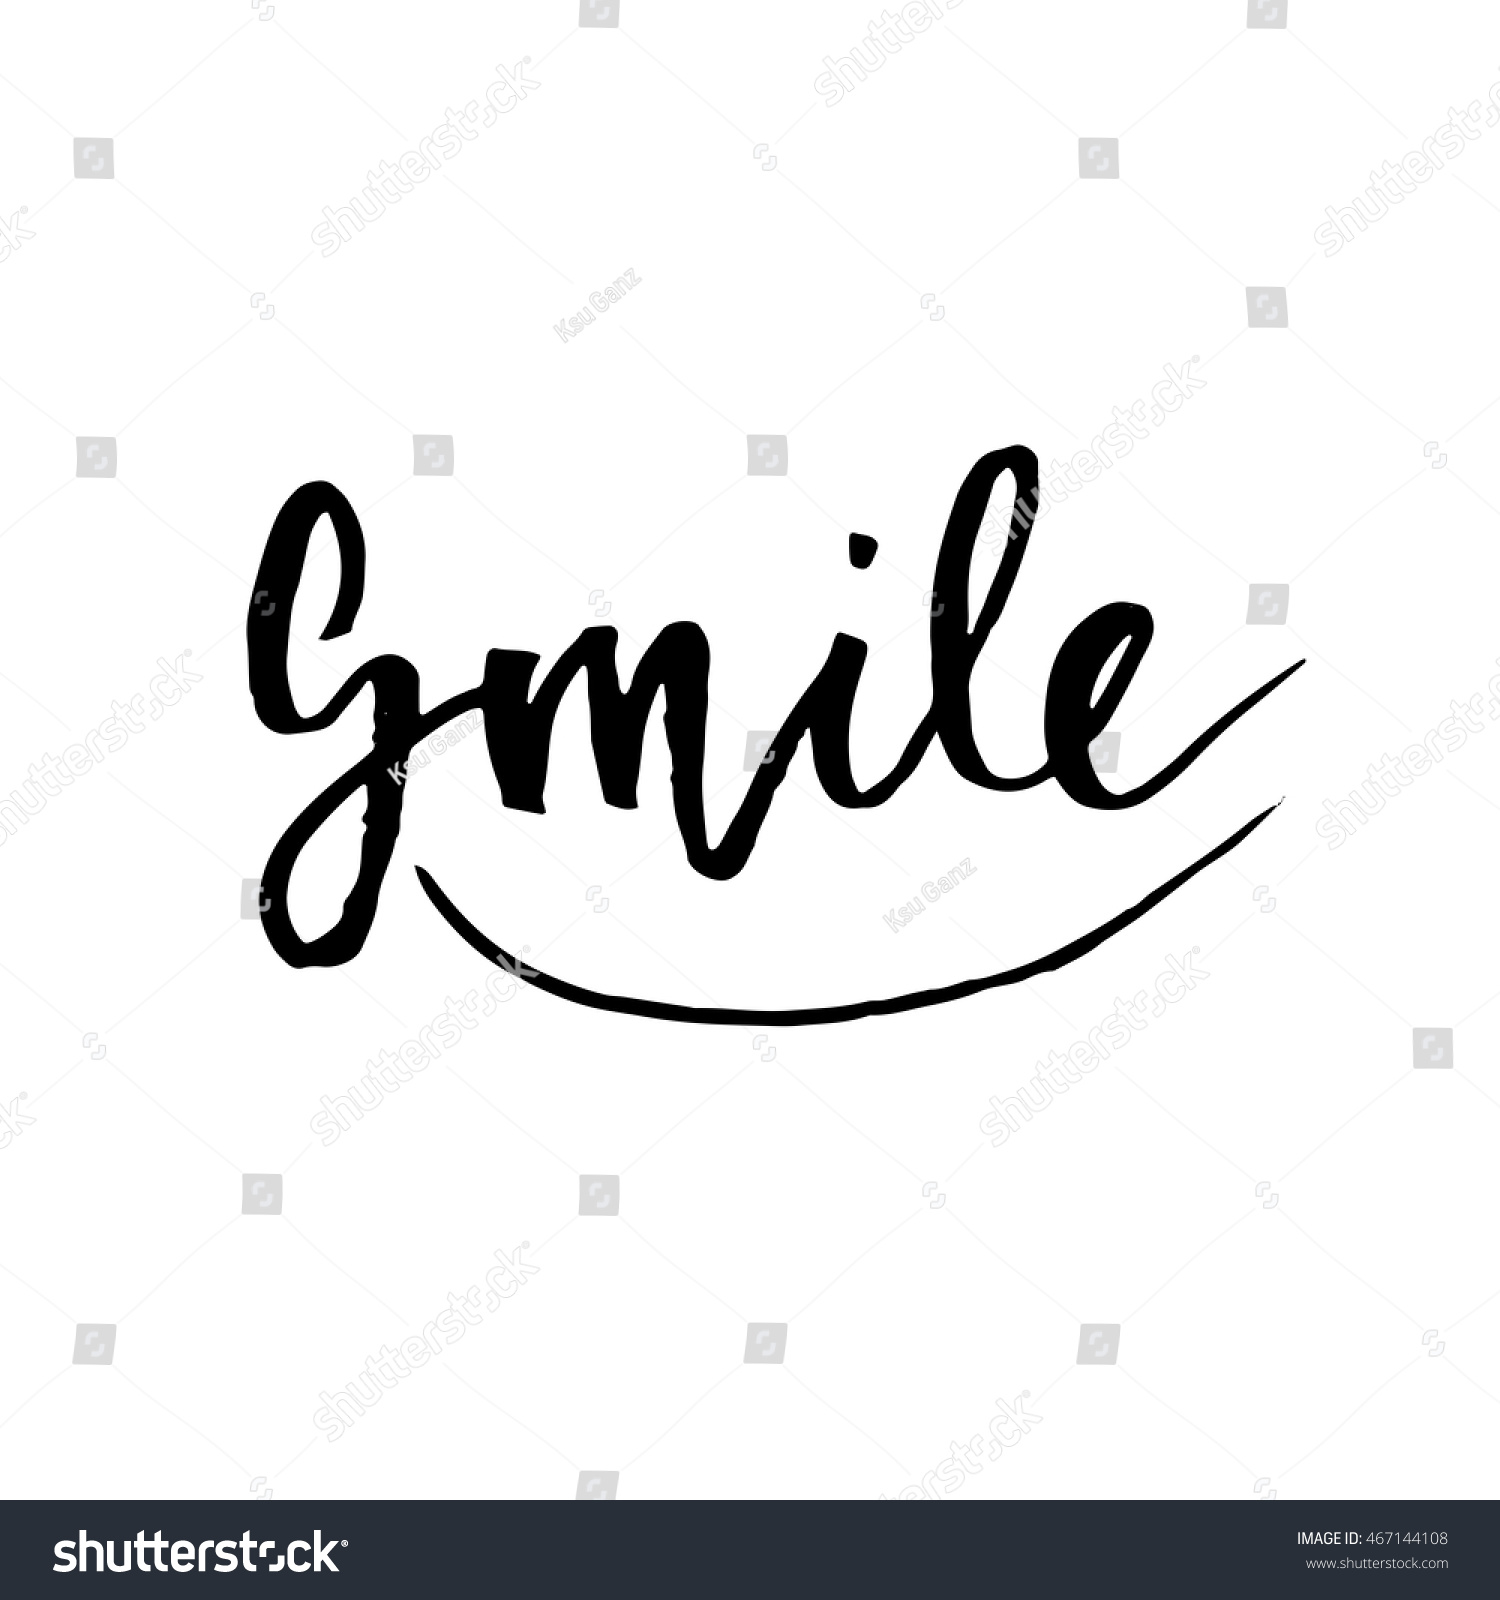 Smile Hand Drawn Lettered Calligraphic Design Stock Vector (Royalty ...